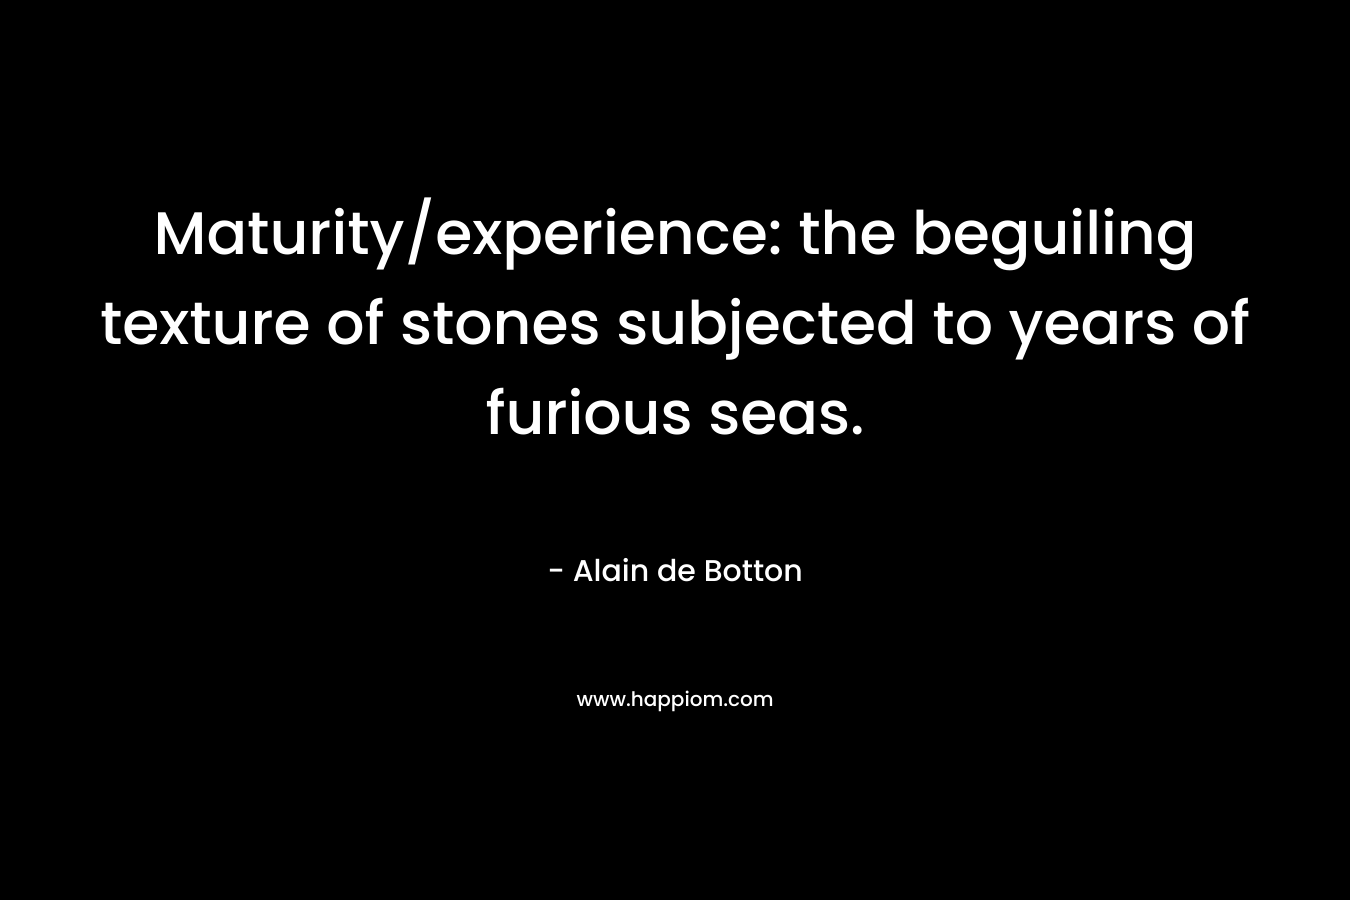 Maturity/experience: the beguiling texture of stones subjected to years of furious seas.